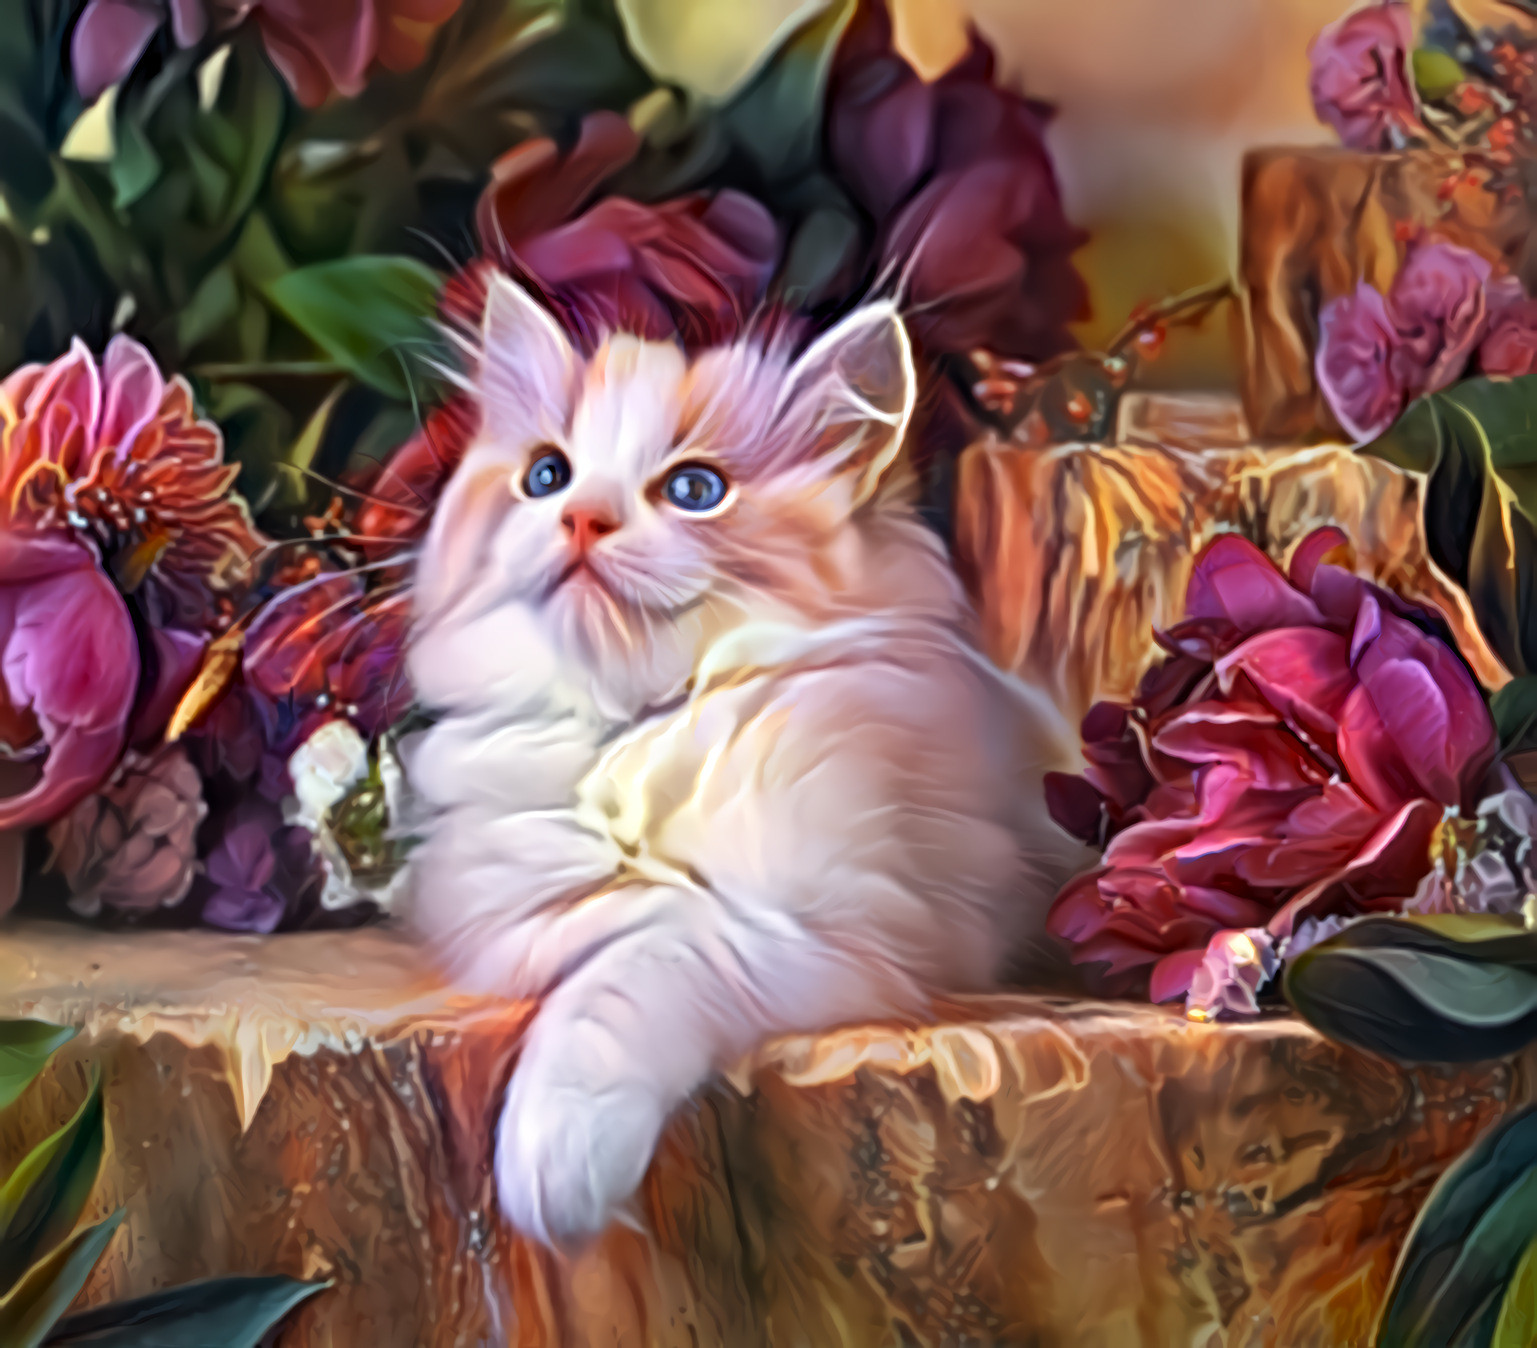 Pretty Kitty On Her Floral Throne [FHD]